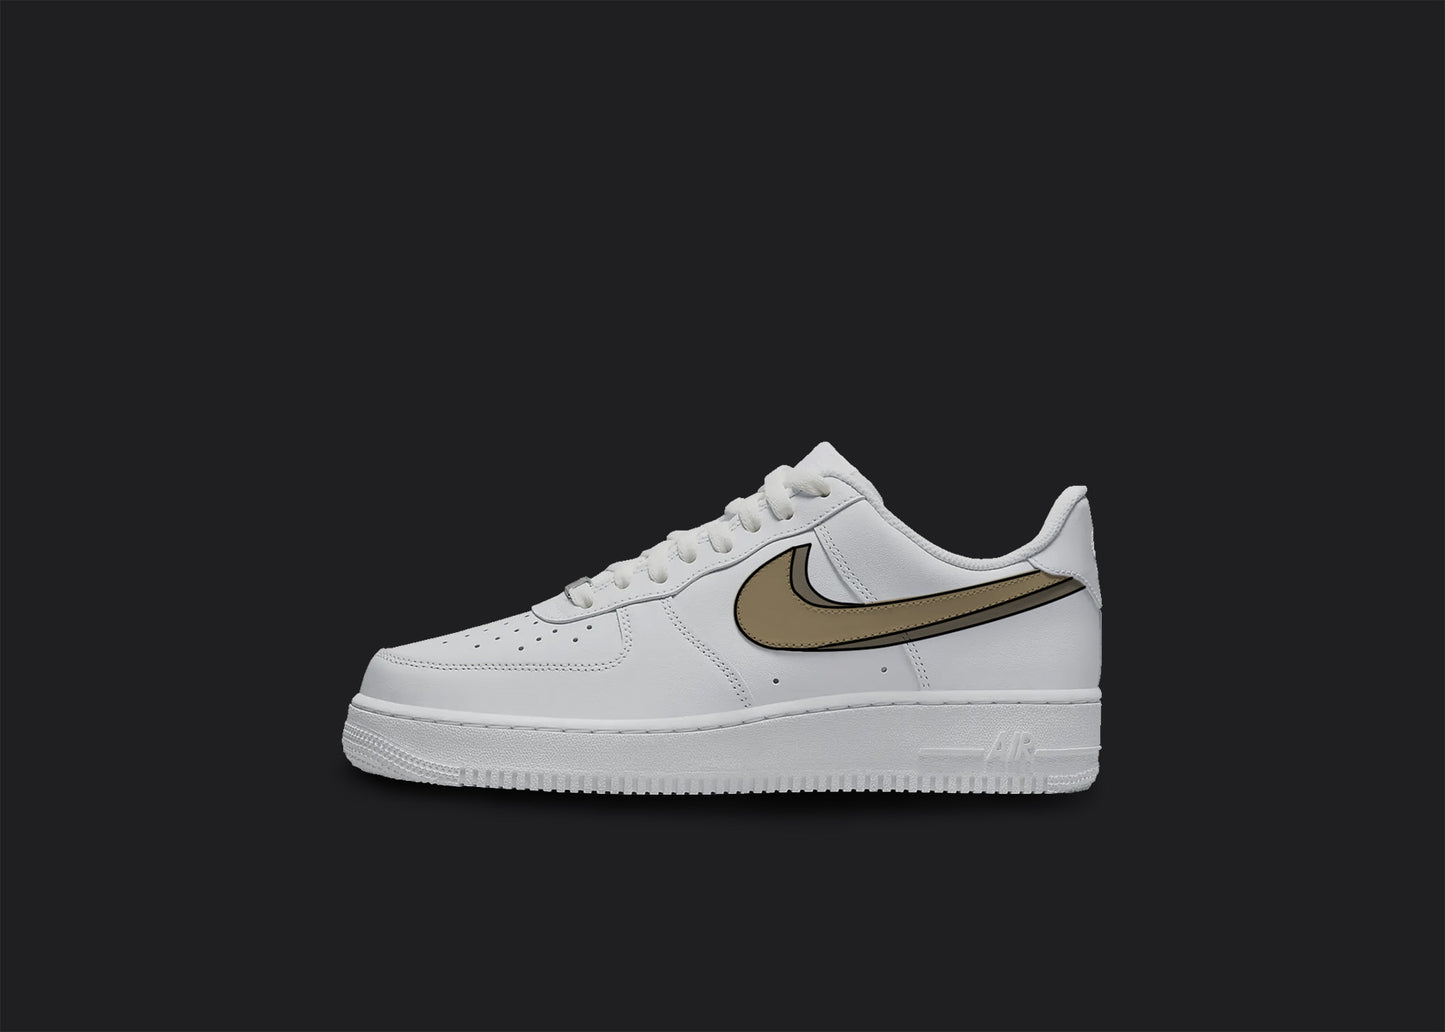 The image is of a Custom Nike Air force 1 sneaker on a blank black background. The white custom sneaker has a cartoon styled brown nike logo on the side. 